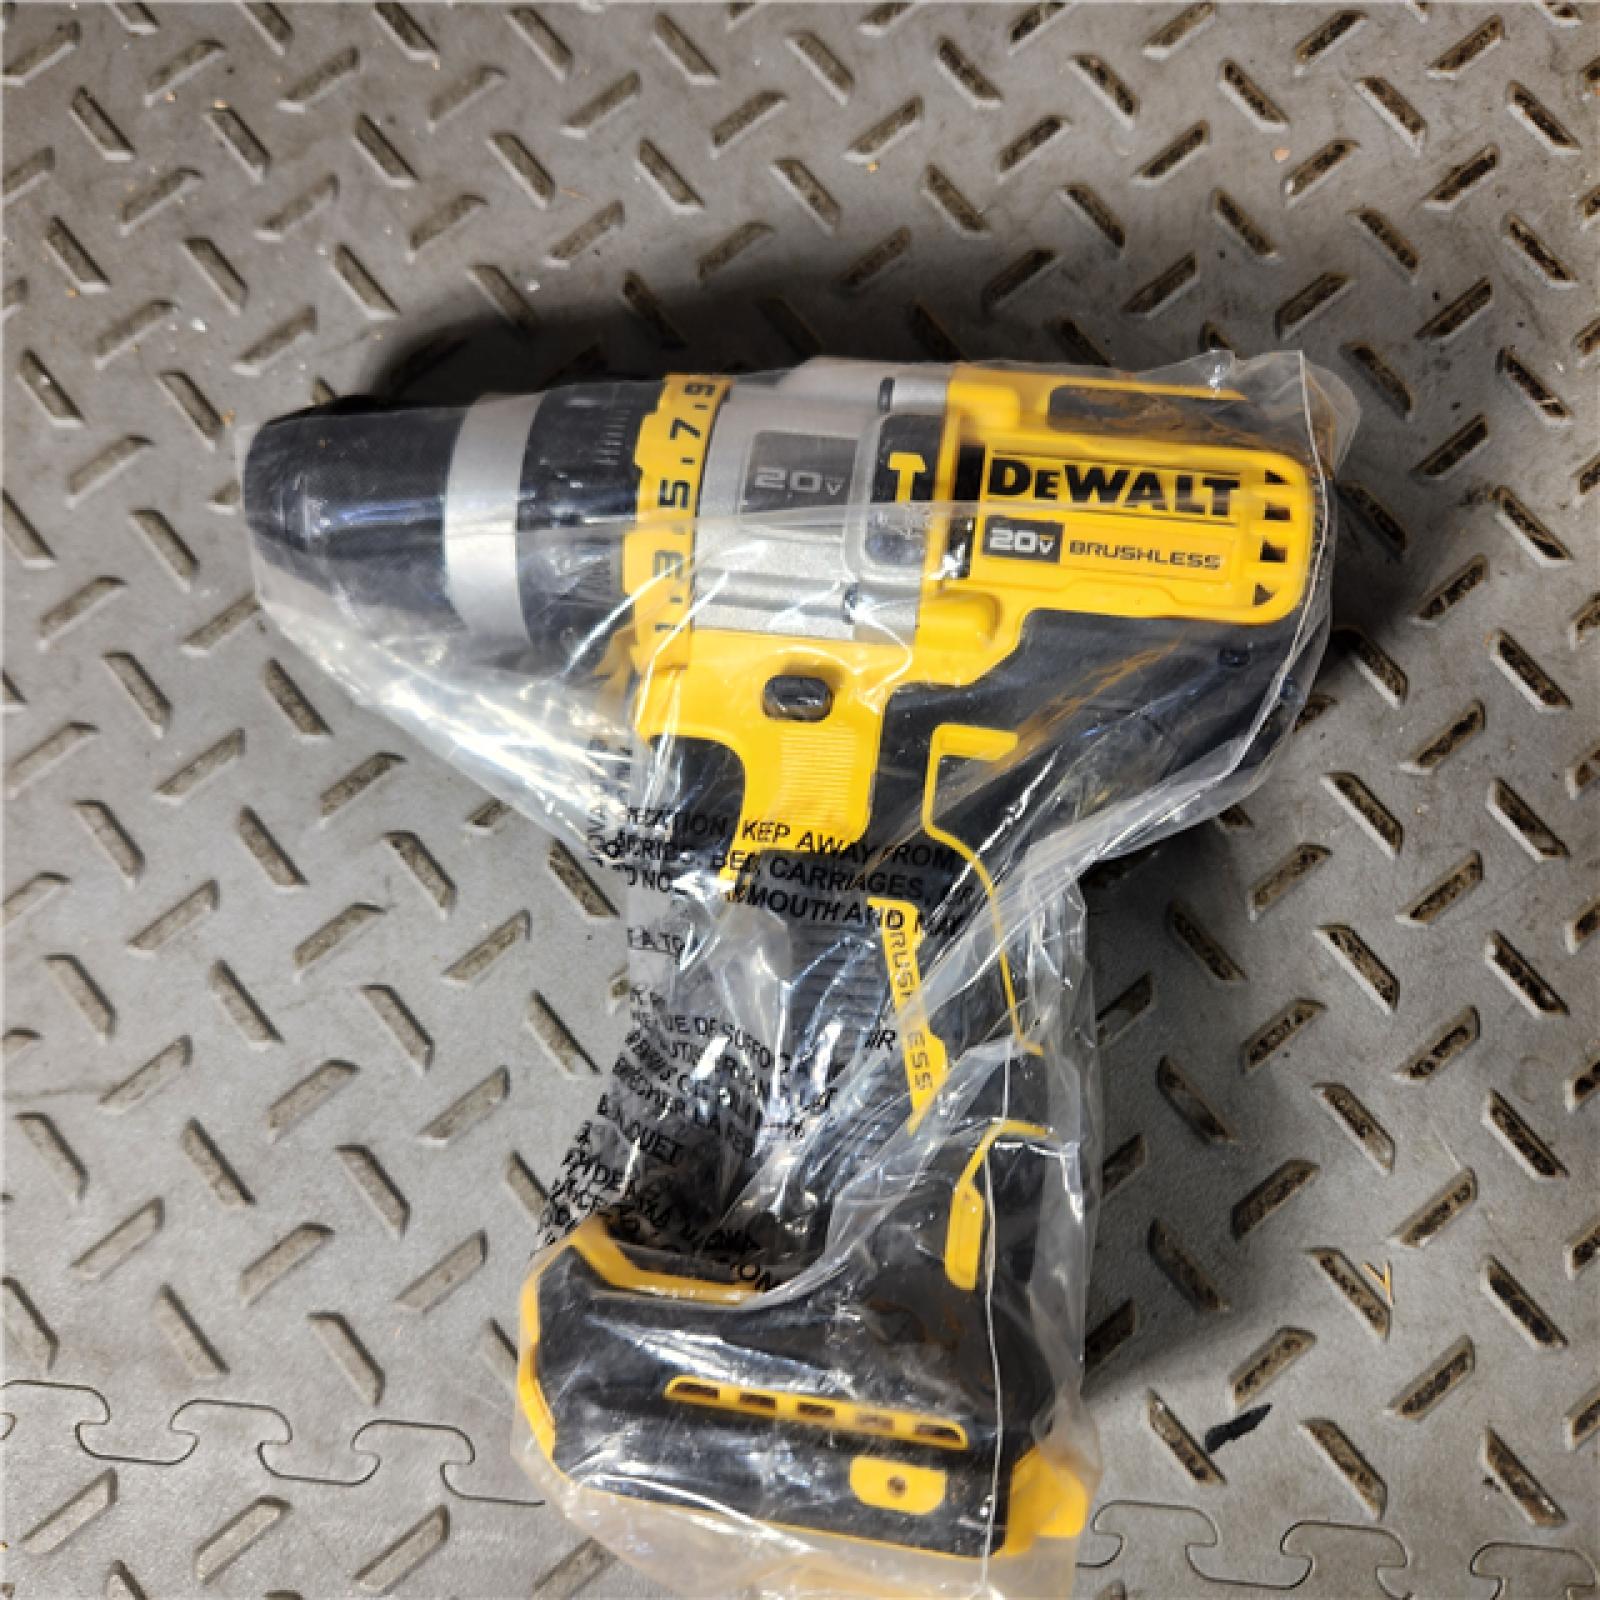 Houston Location - AS-IS Dewalt DCD999B 20V MAX Flexvolt 1/2  Cordless Hammer Drill Bare Tool (MISSING HANDLE) - Appears IN LIKE NEW Condition